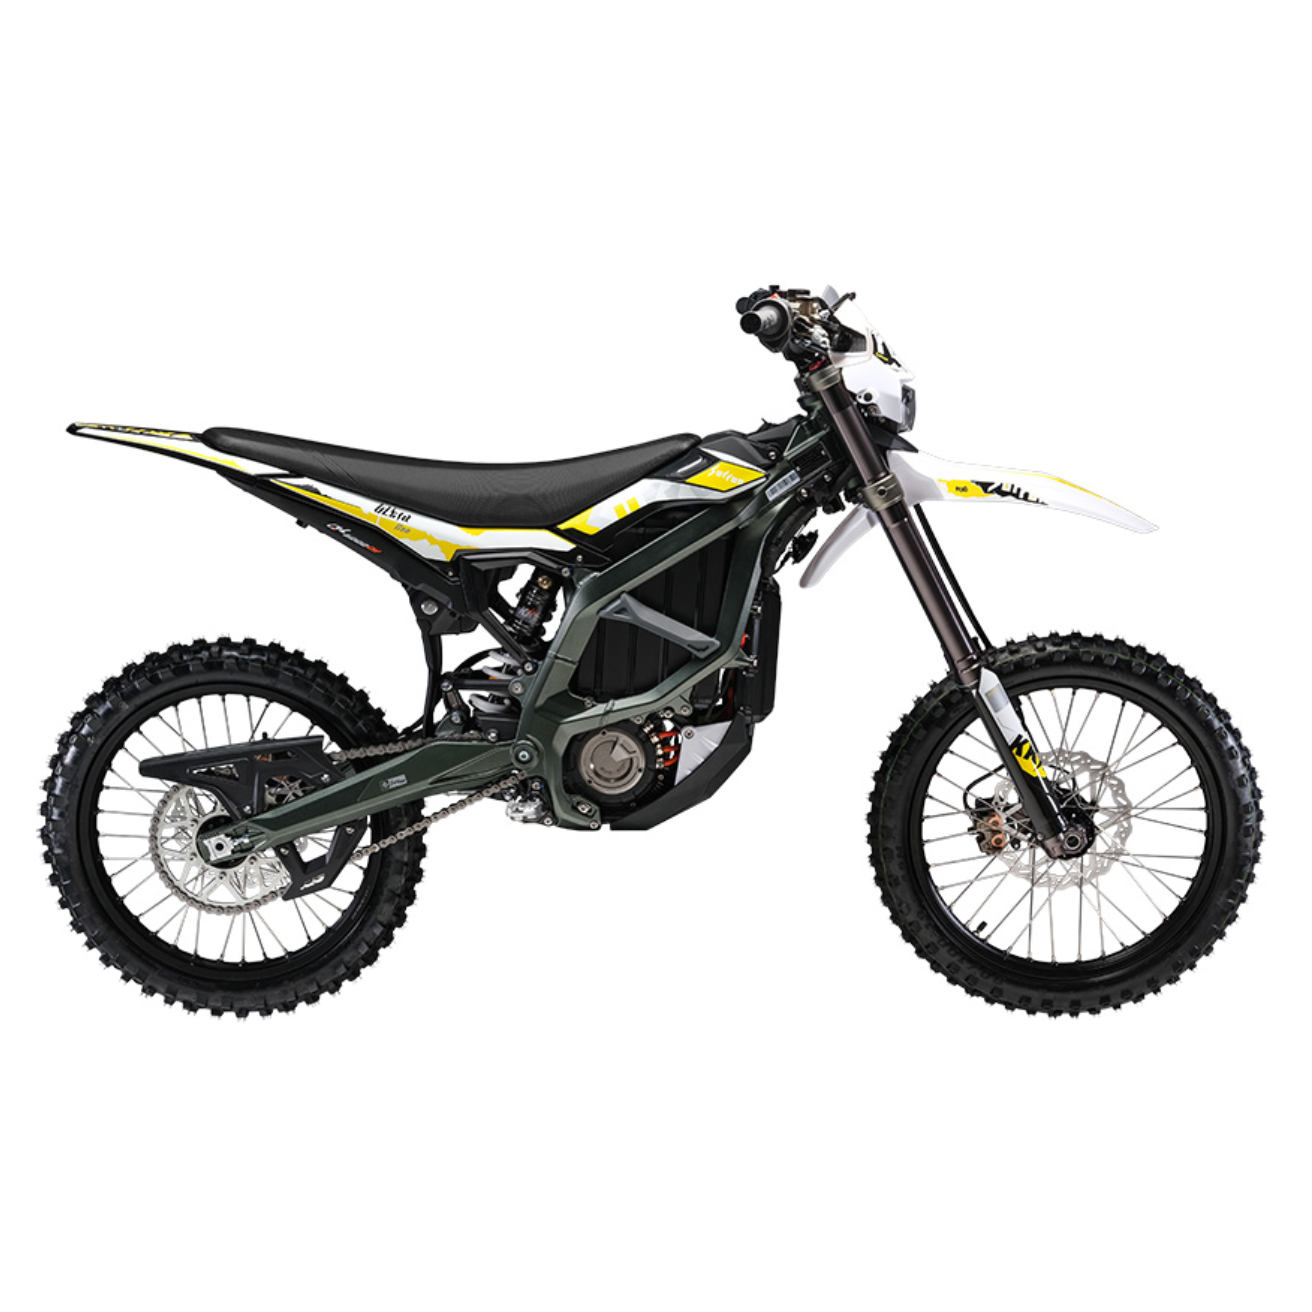 Surron Ultra Bee MX enduro version electric dirt bike stock photo white background featuring an ebike front on shot